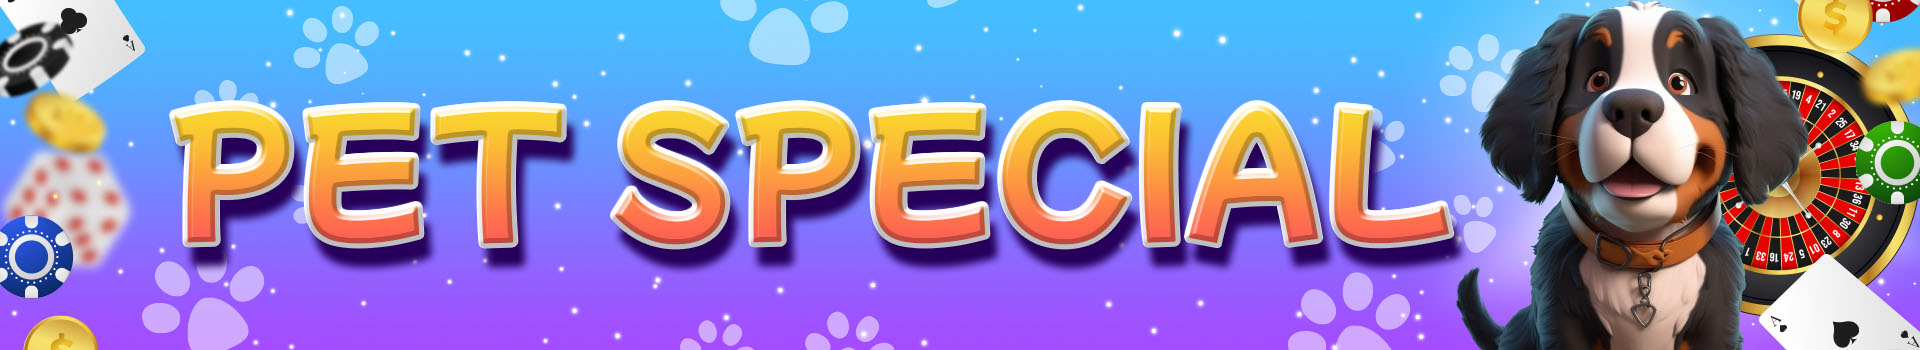 pets-special Banner